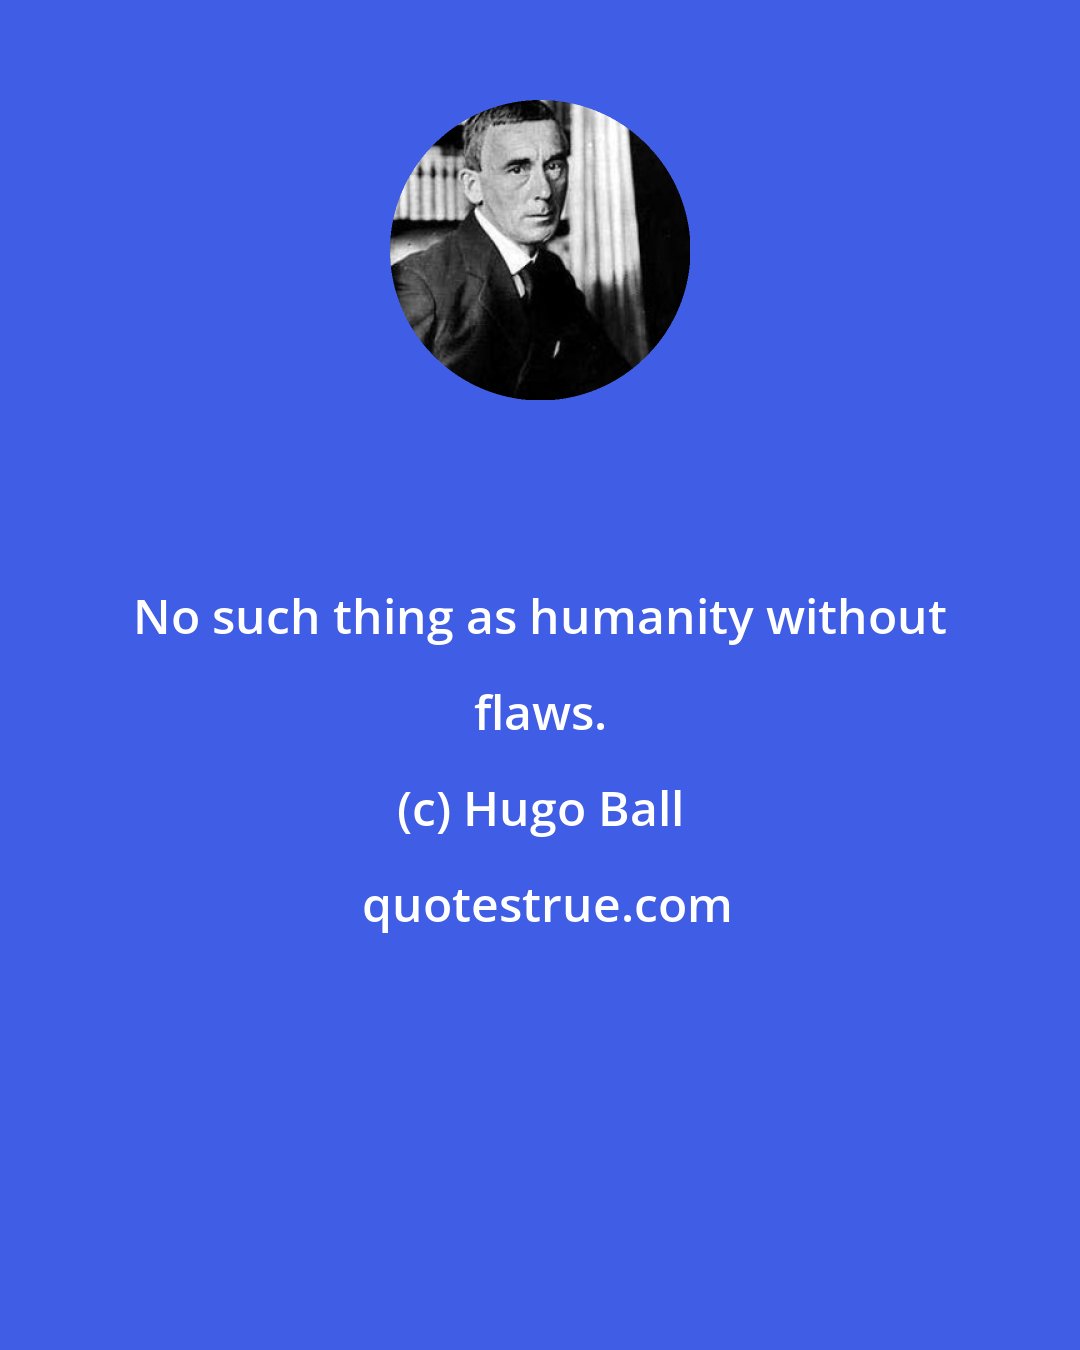 Hugo Ball: No such thing as humanity without flaws.